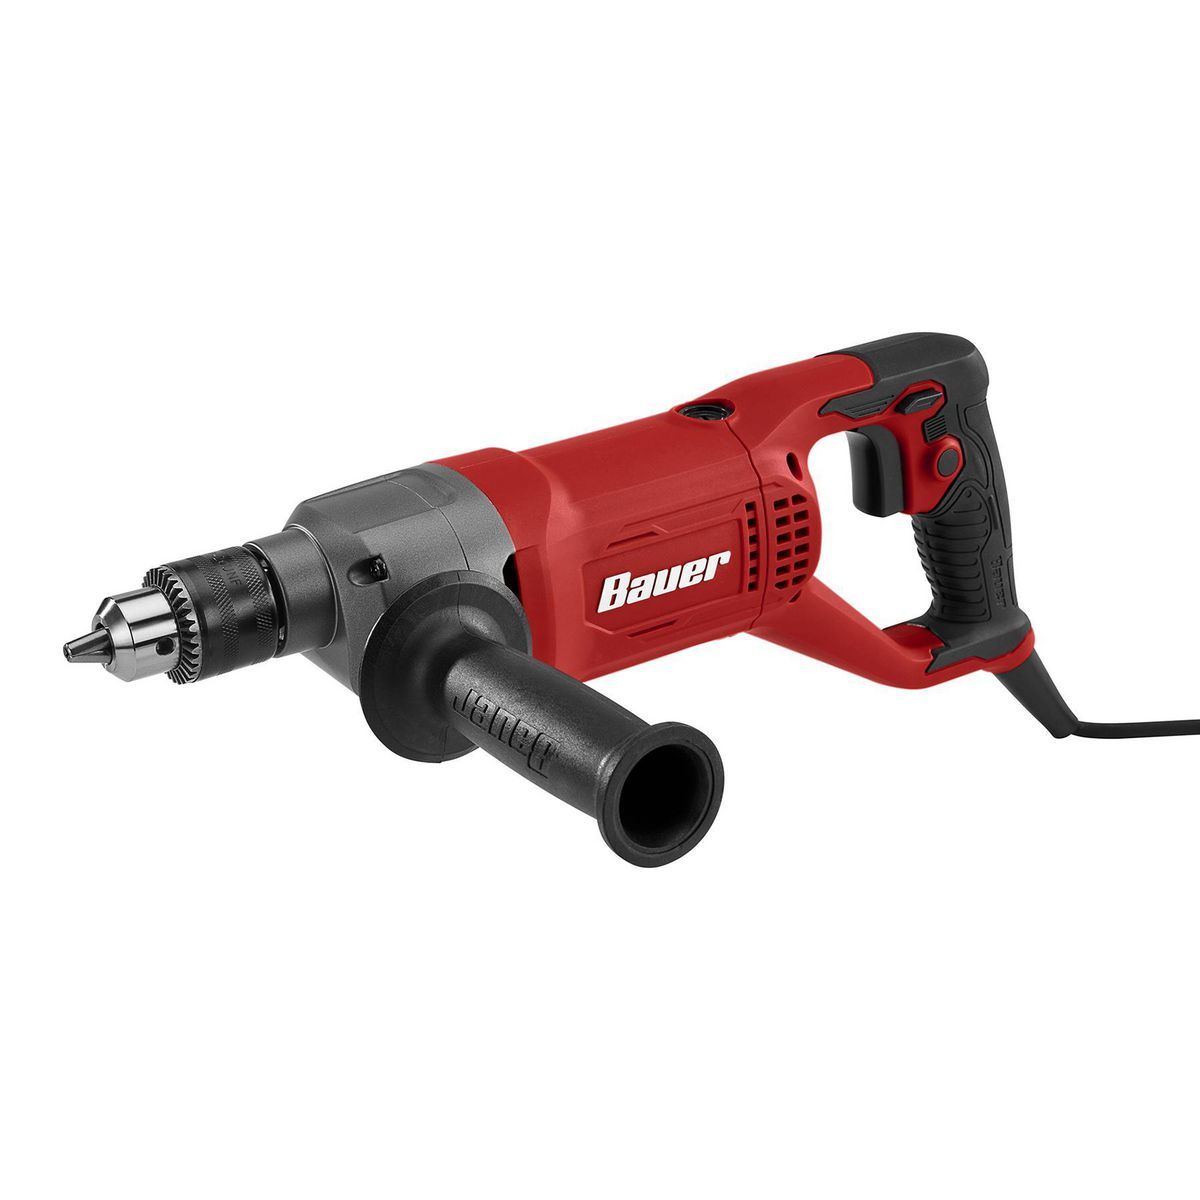 9 Amp, 1/2 in. Variable-Speed D-Handle Drill